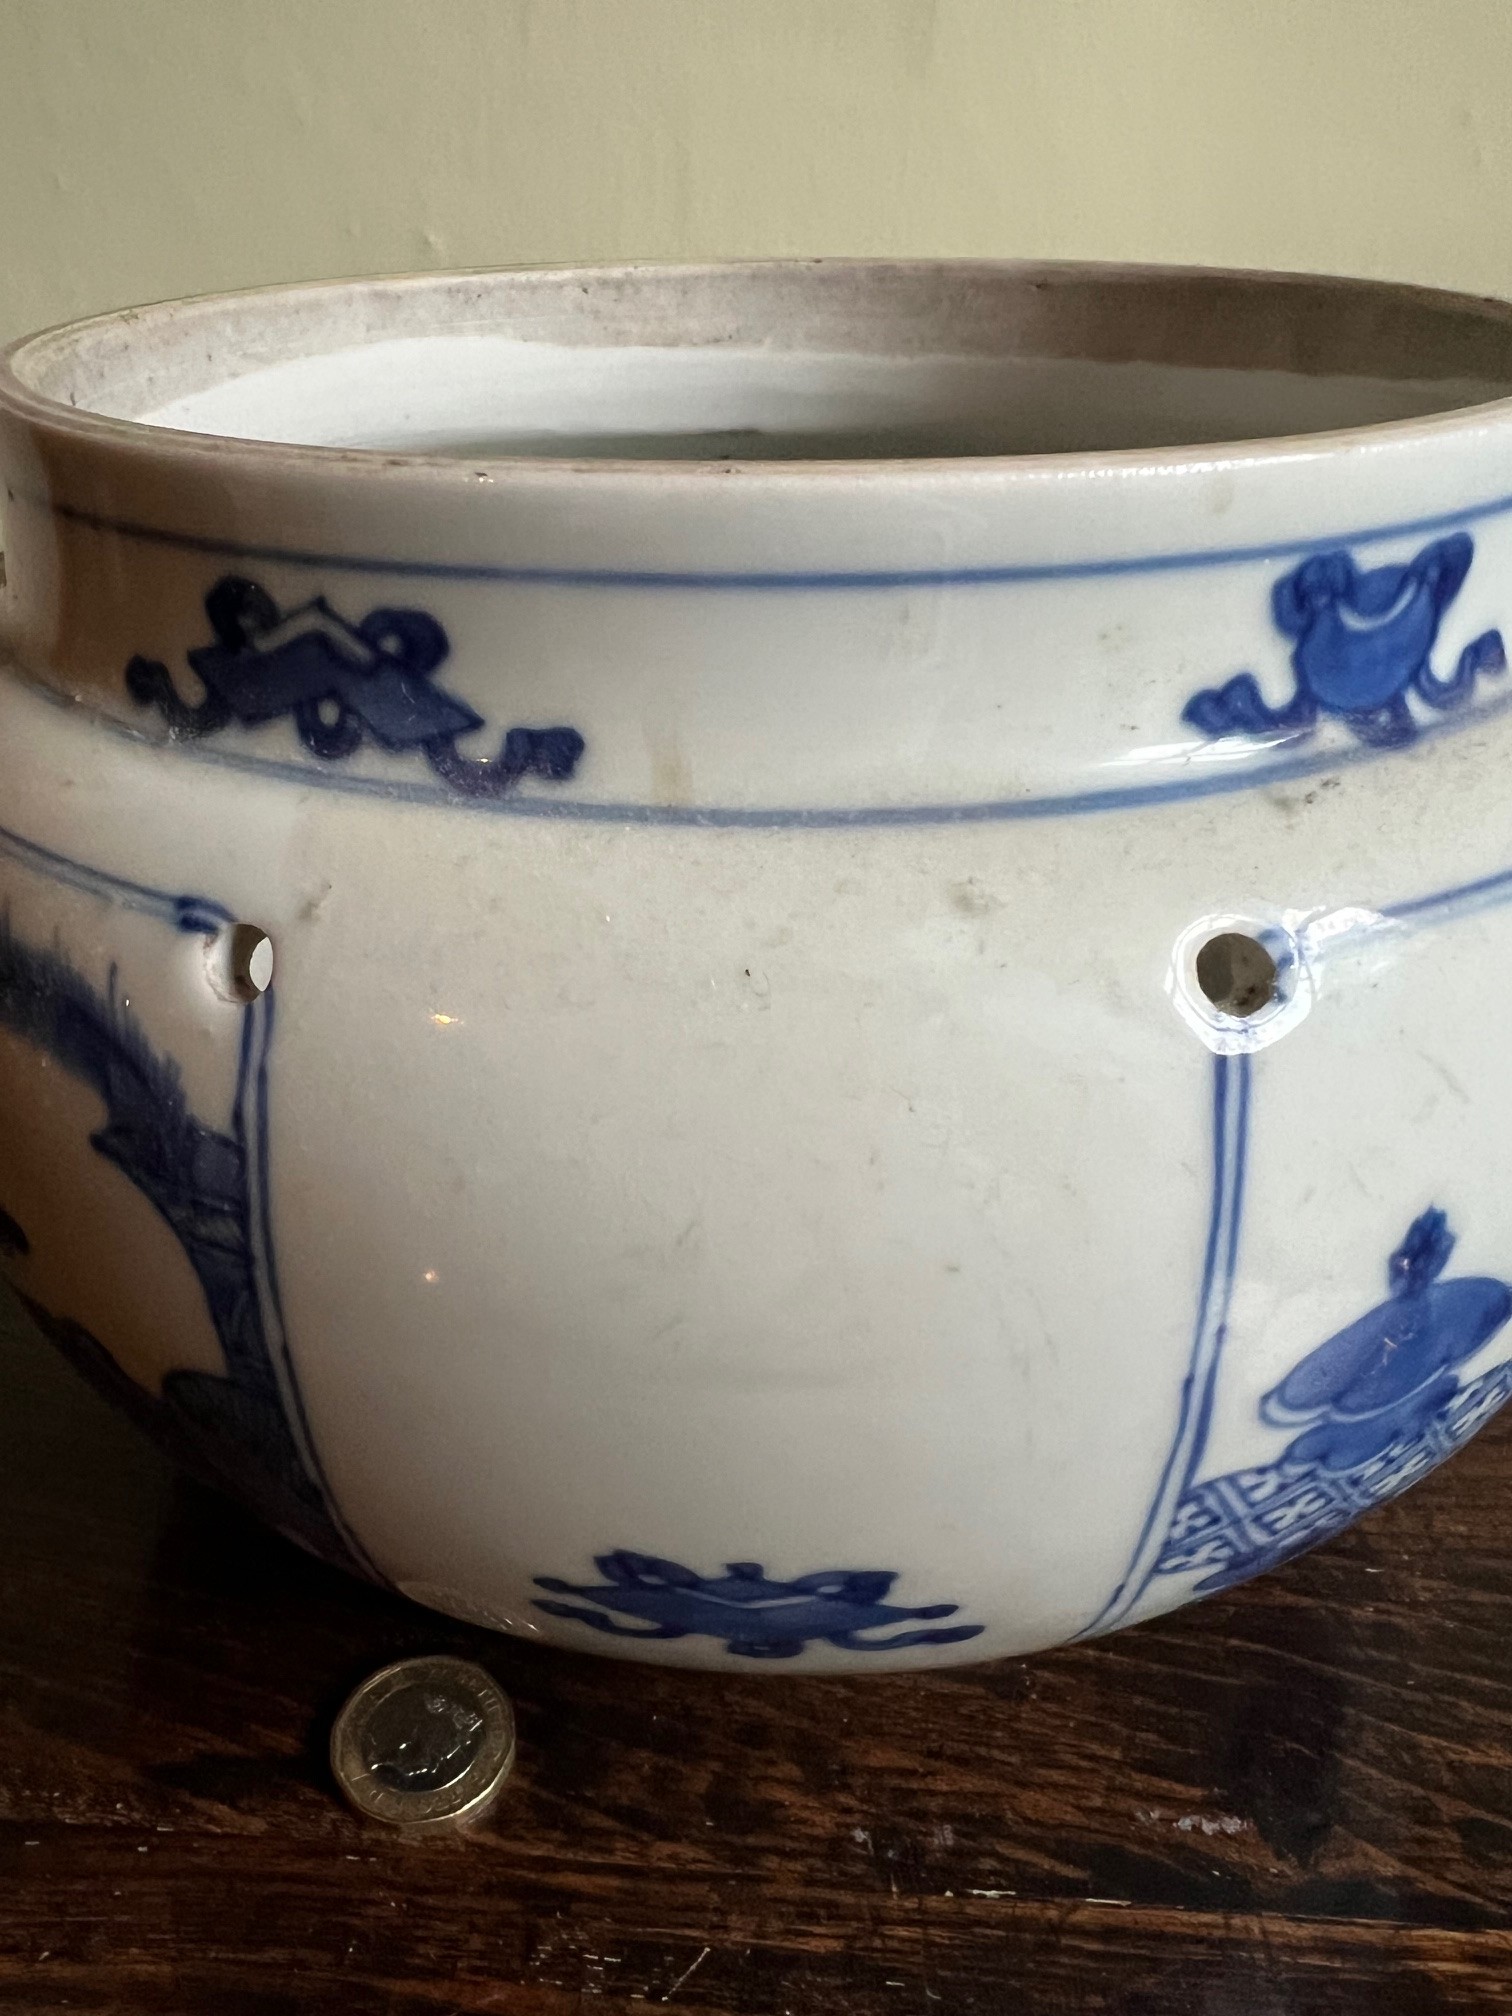 EARLY 20th CENTURY JAPANESE HANGING PLANTER, BLUE AND WHITE, DIAMETER APPROX 16cm - Image 2 of 3